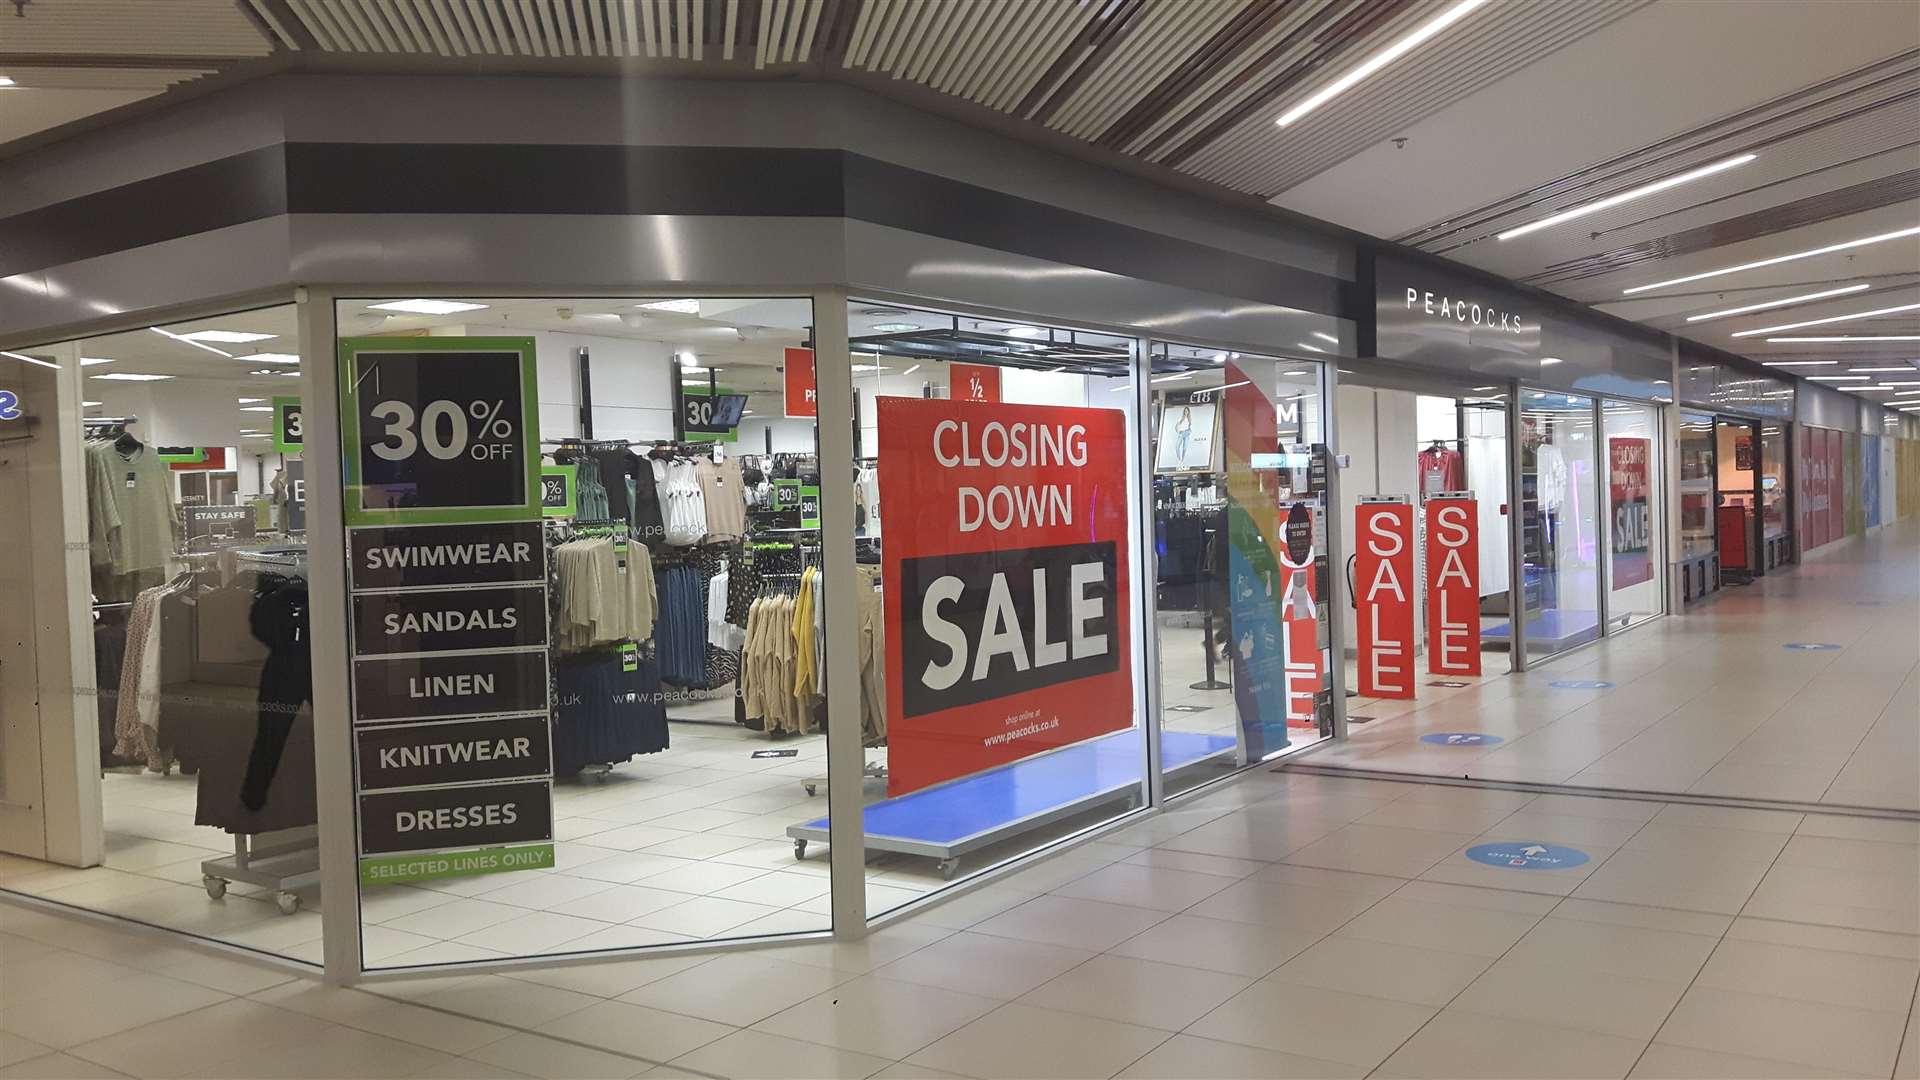 The Peacocks store in The Mall, Maidstone, looks set to close